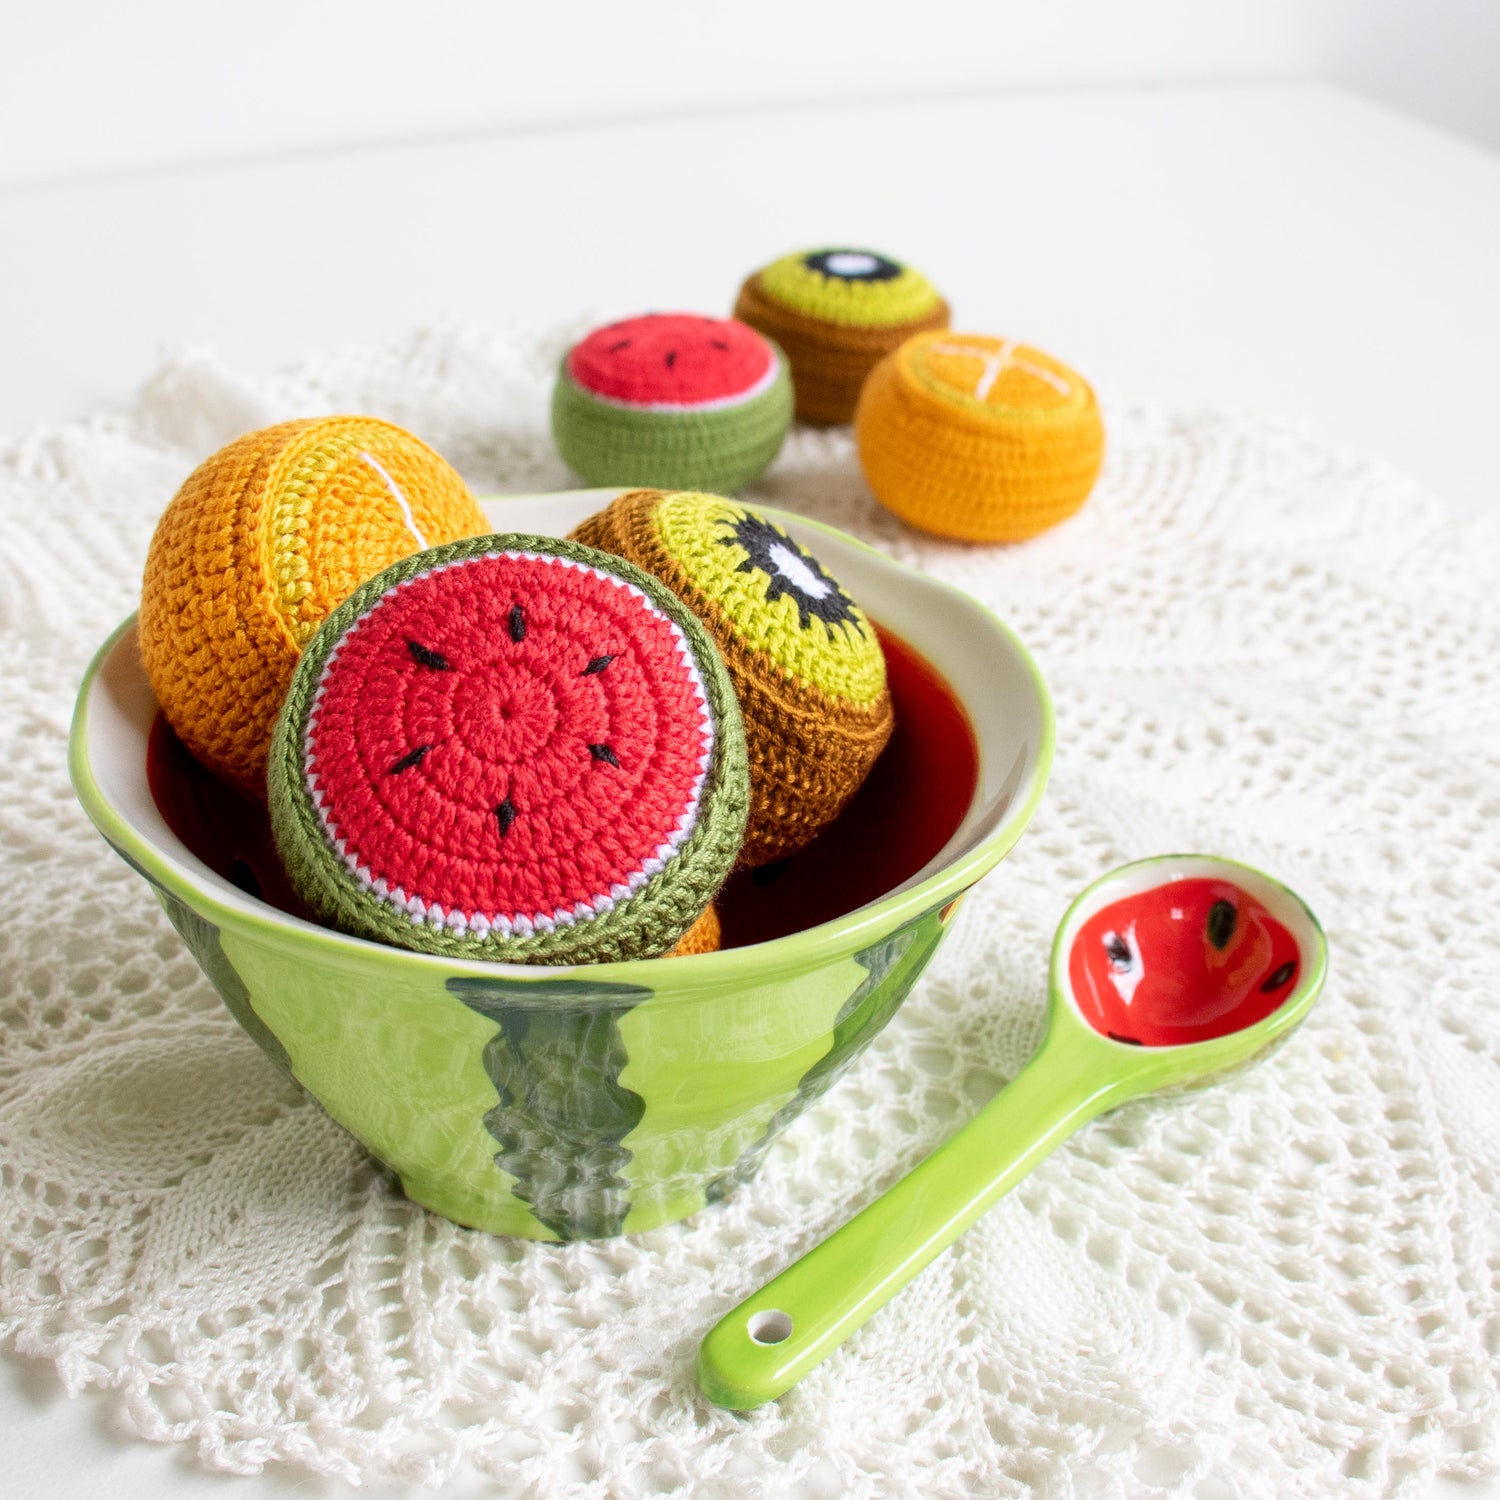 Beautiful hand crocheted fruit-inspired pin cushion/pattern weights can be found at The Krafty Mobile